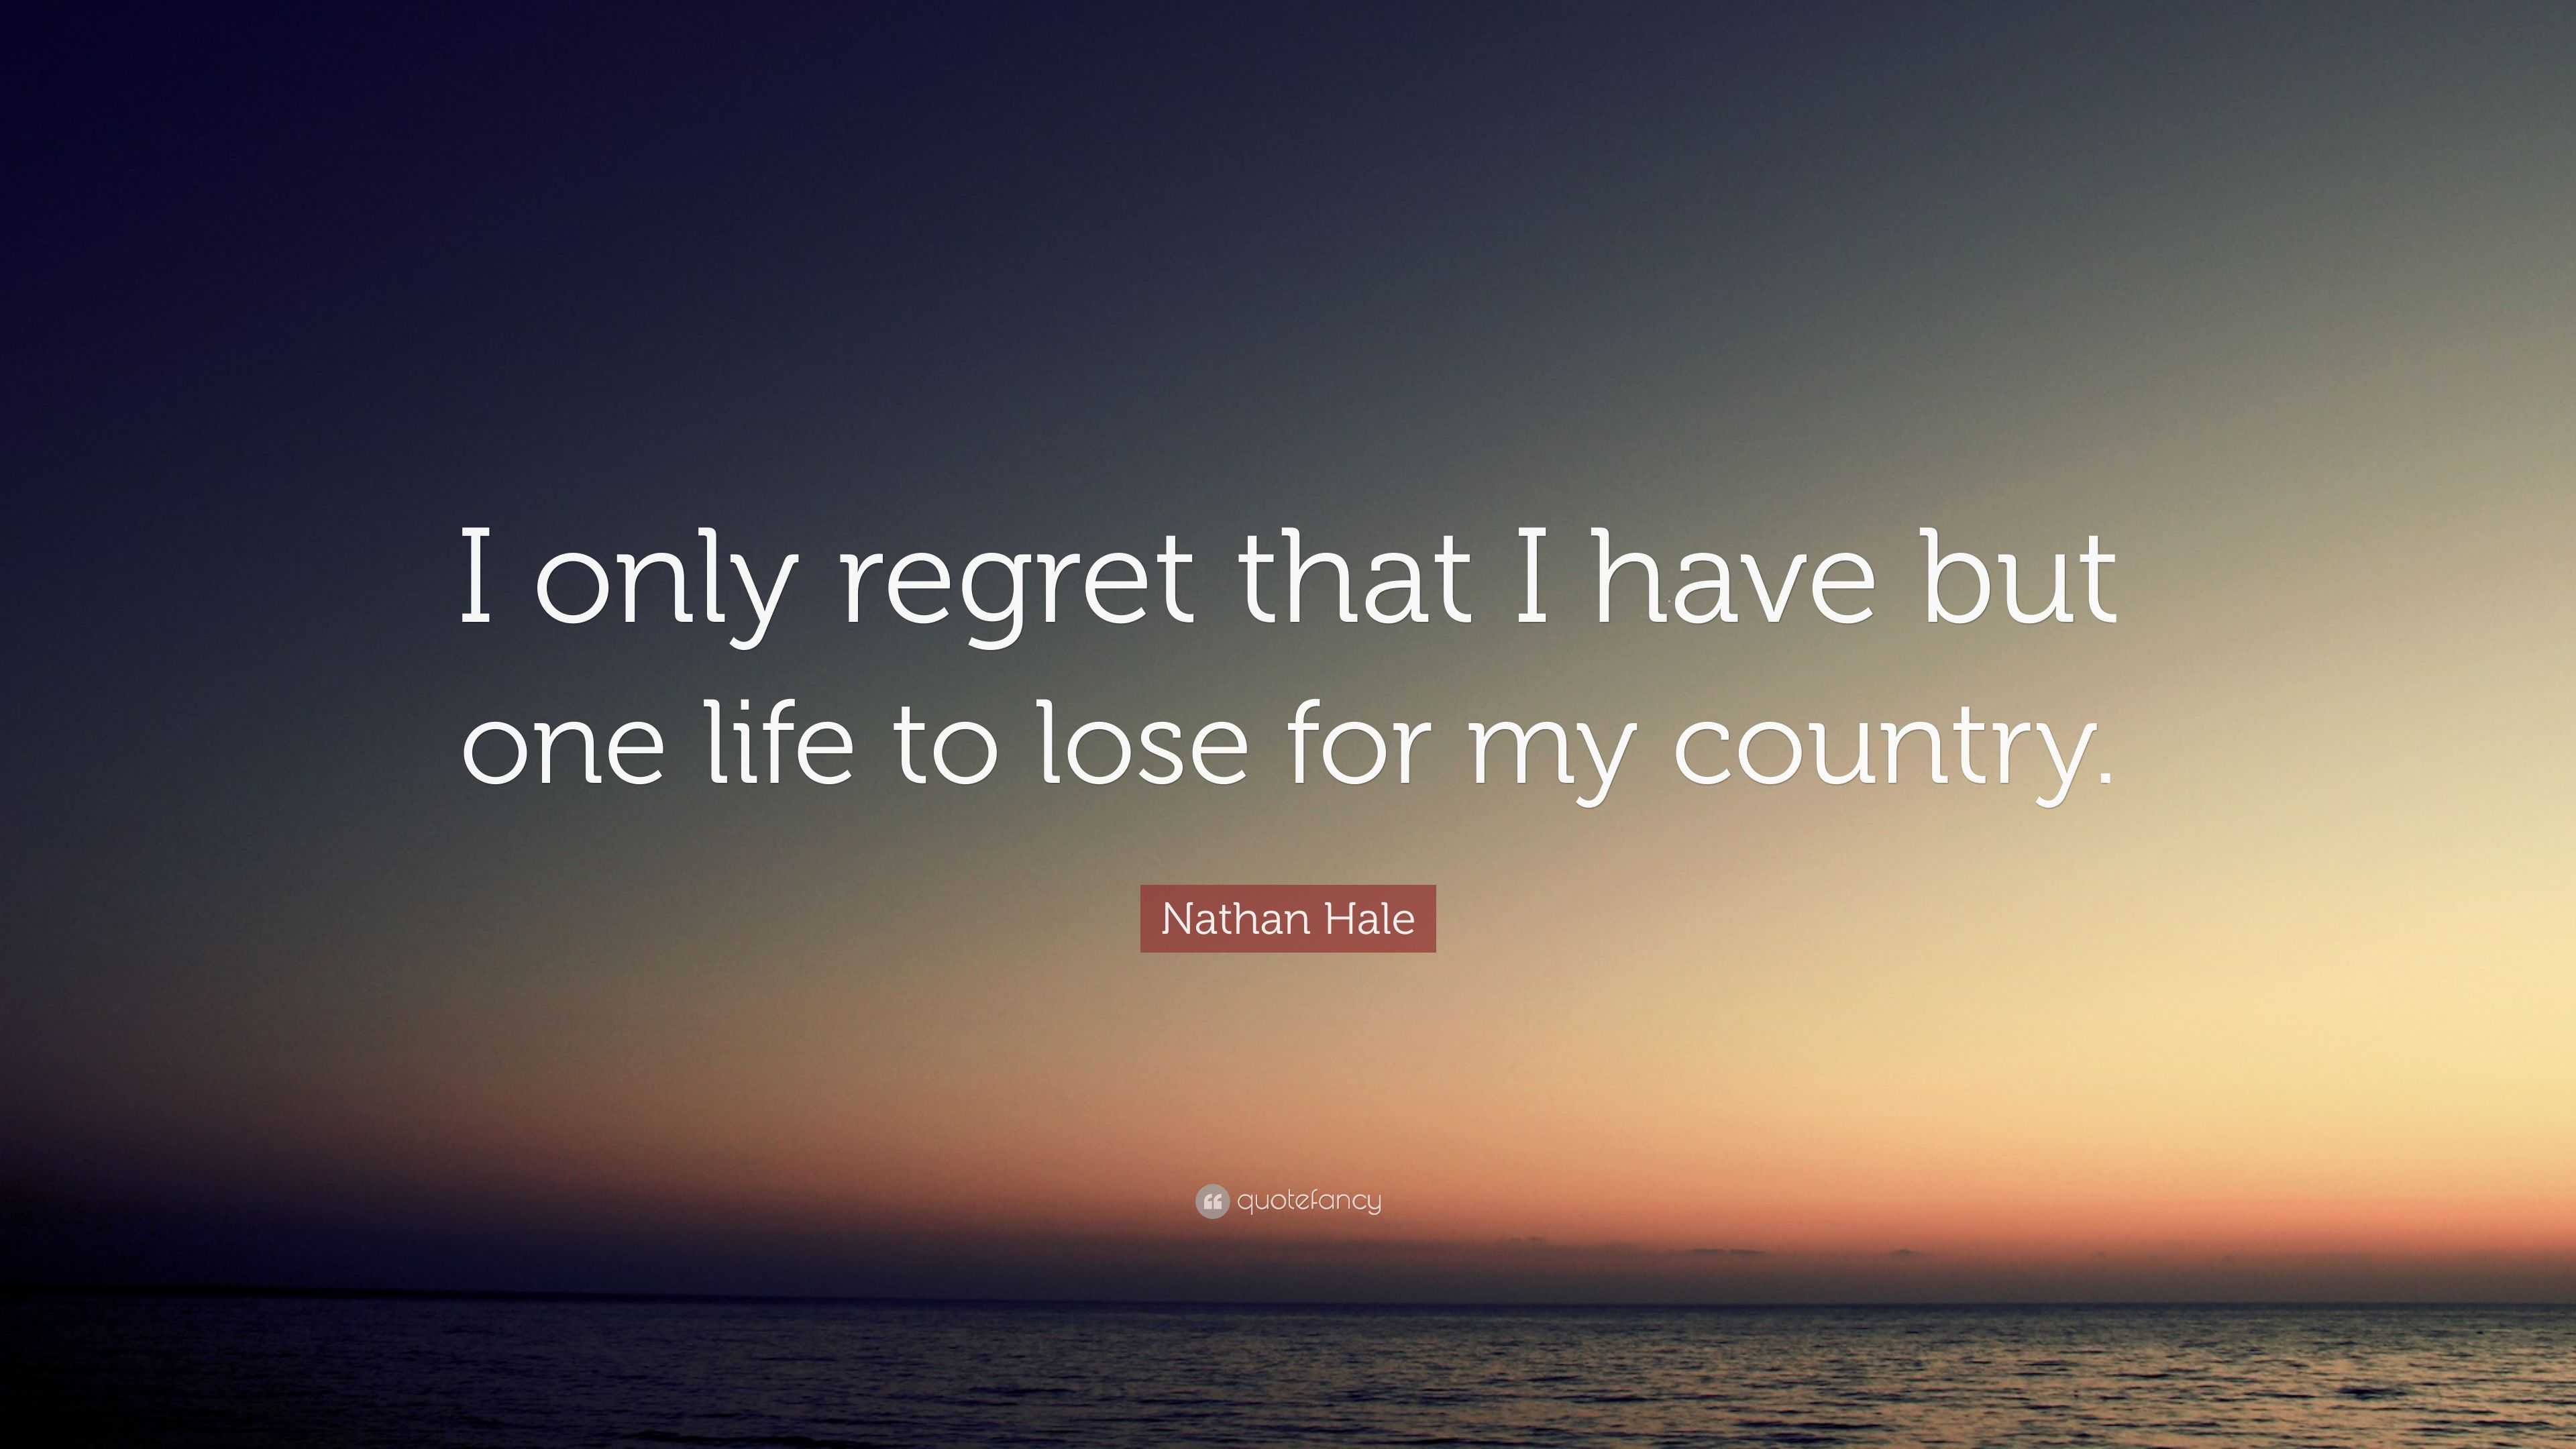 Nathan Hale Quote: “I only regret that I have but one life to lose for ...